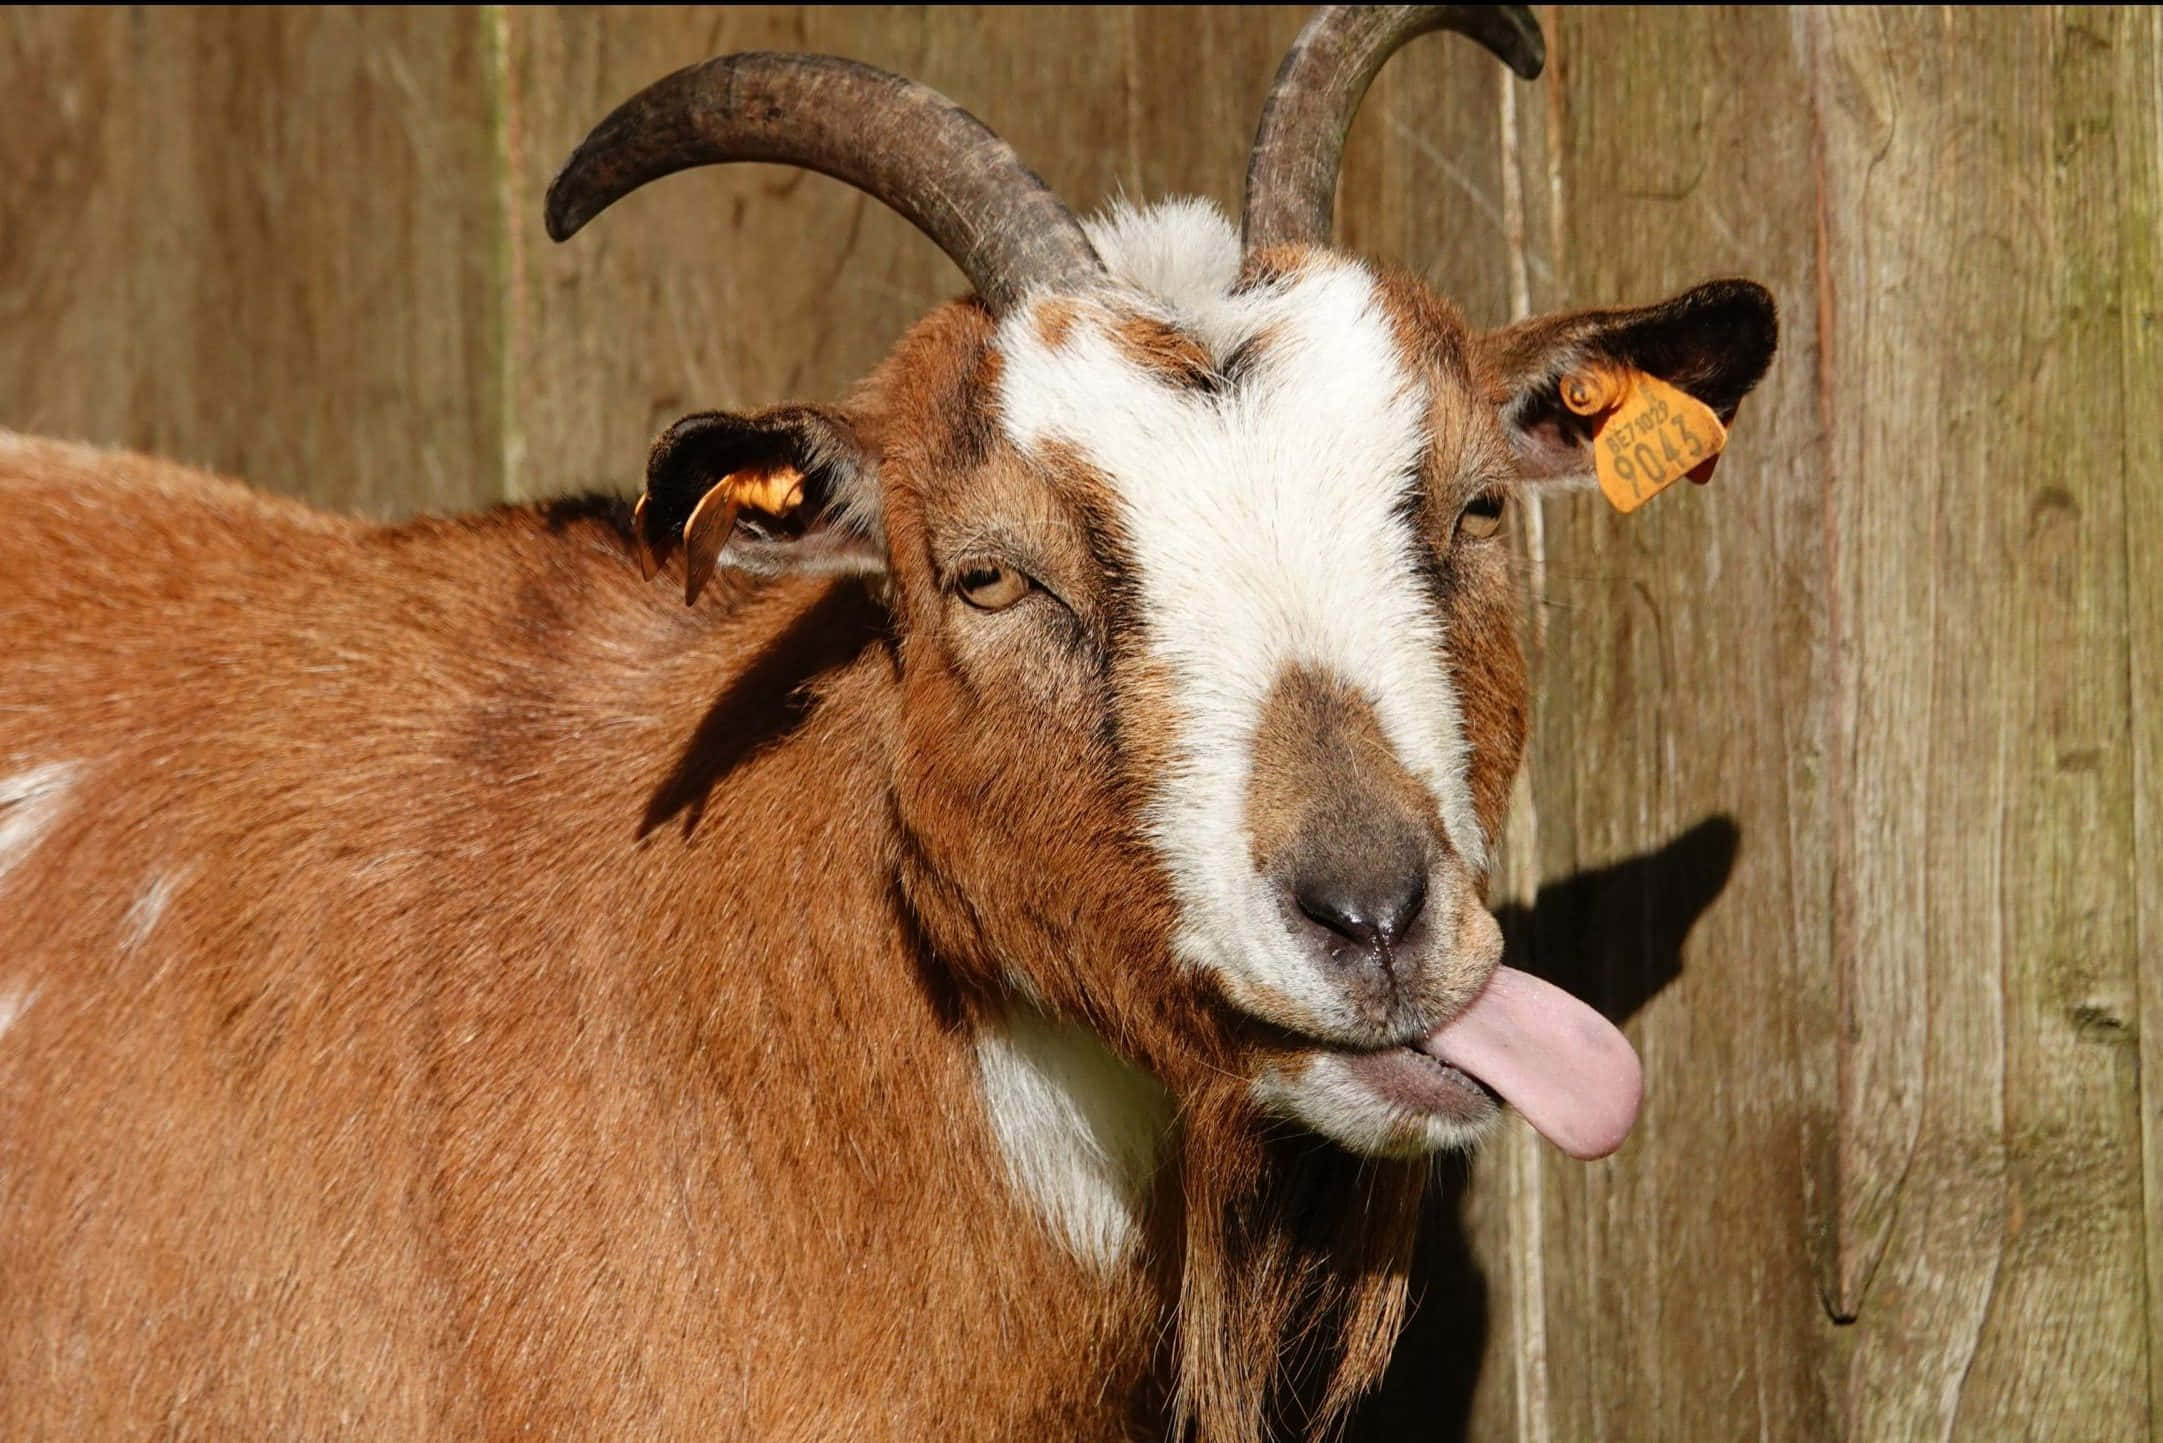 Caption: Delighted Goat Enjoying His Green Feast Background